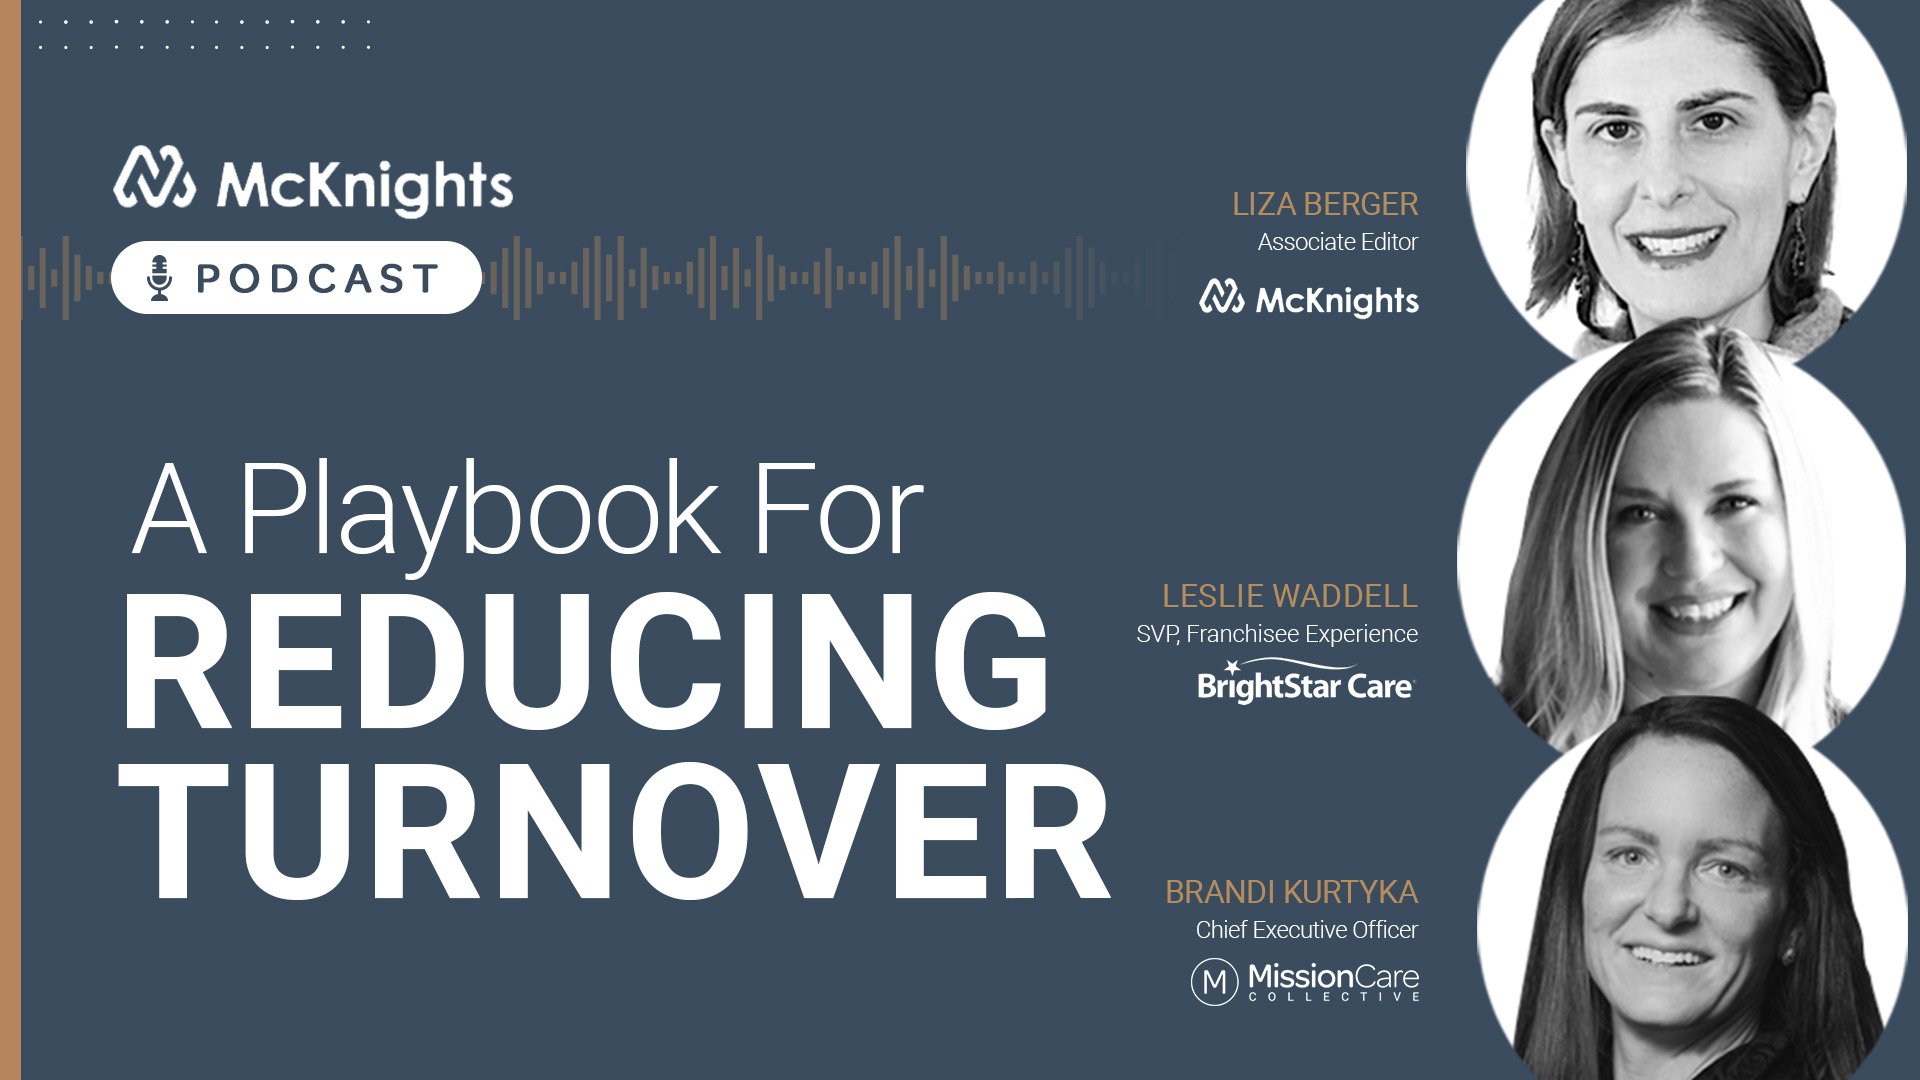 Home Care Turnover: Live Podcast With BrightStar Care